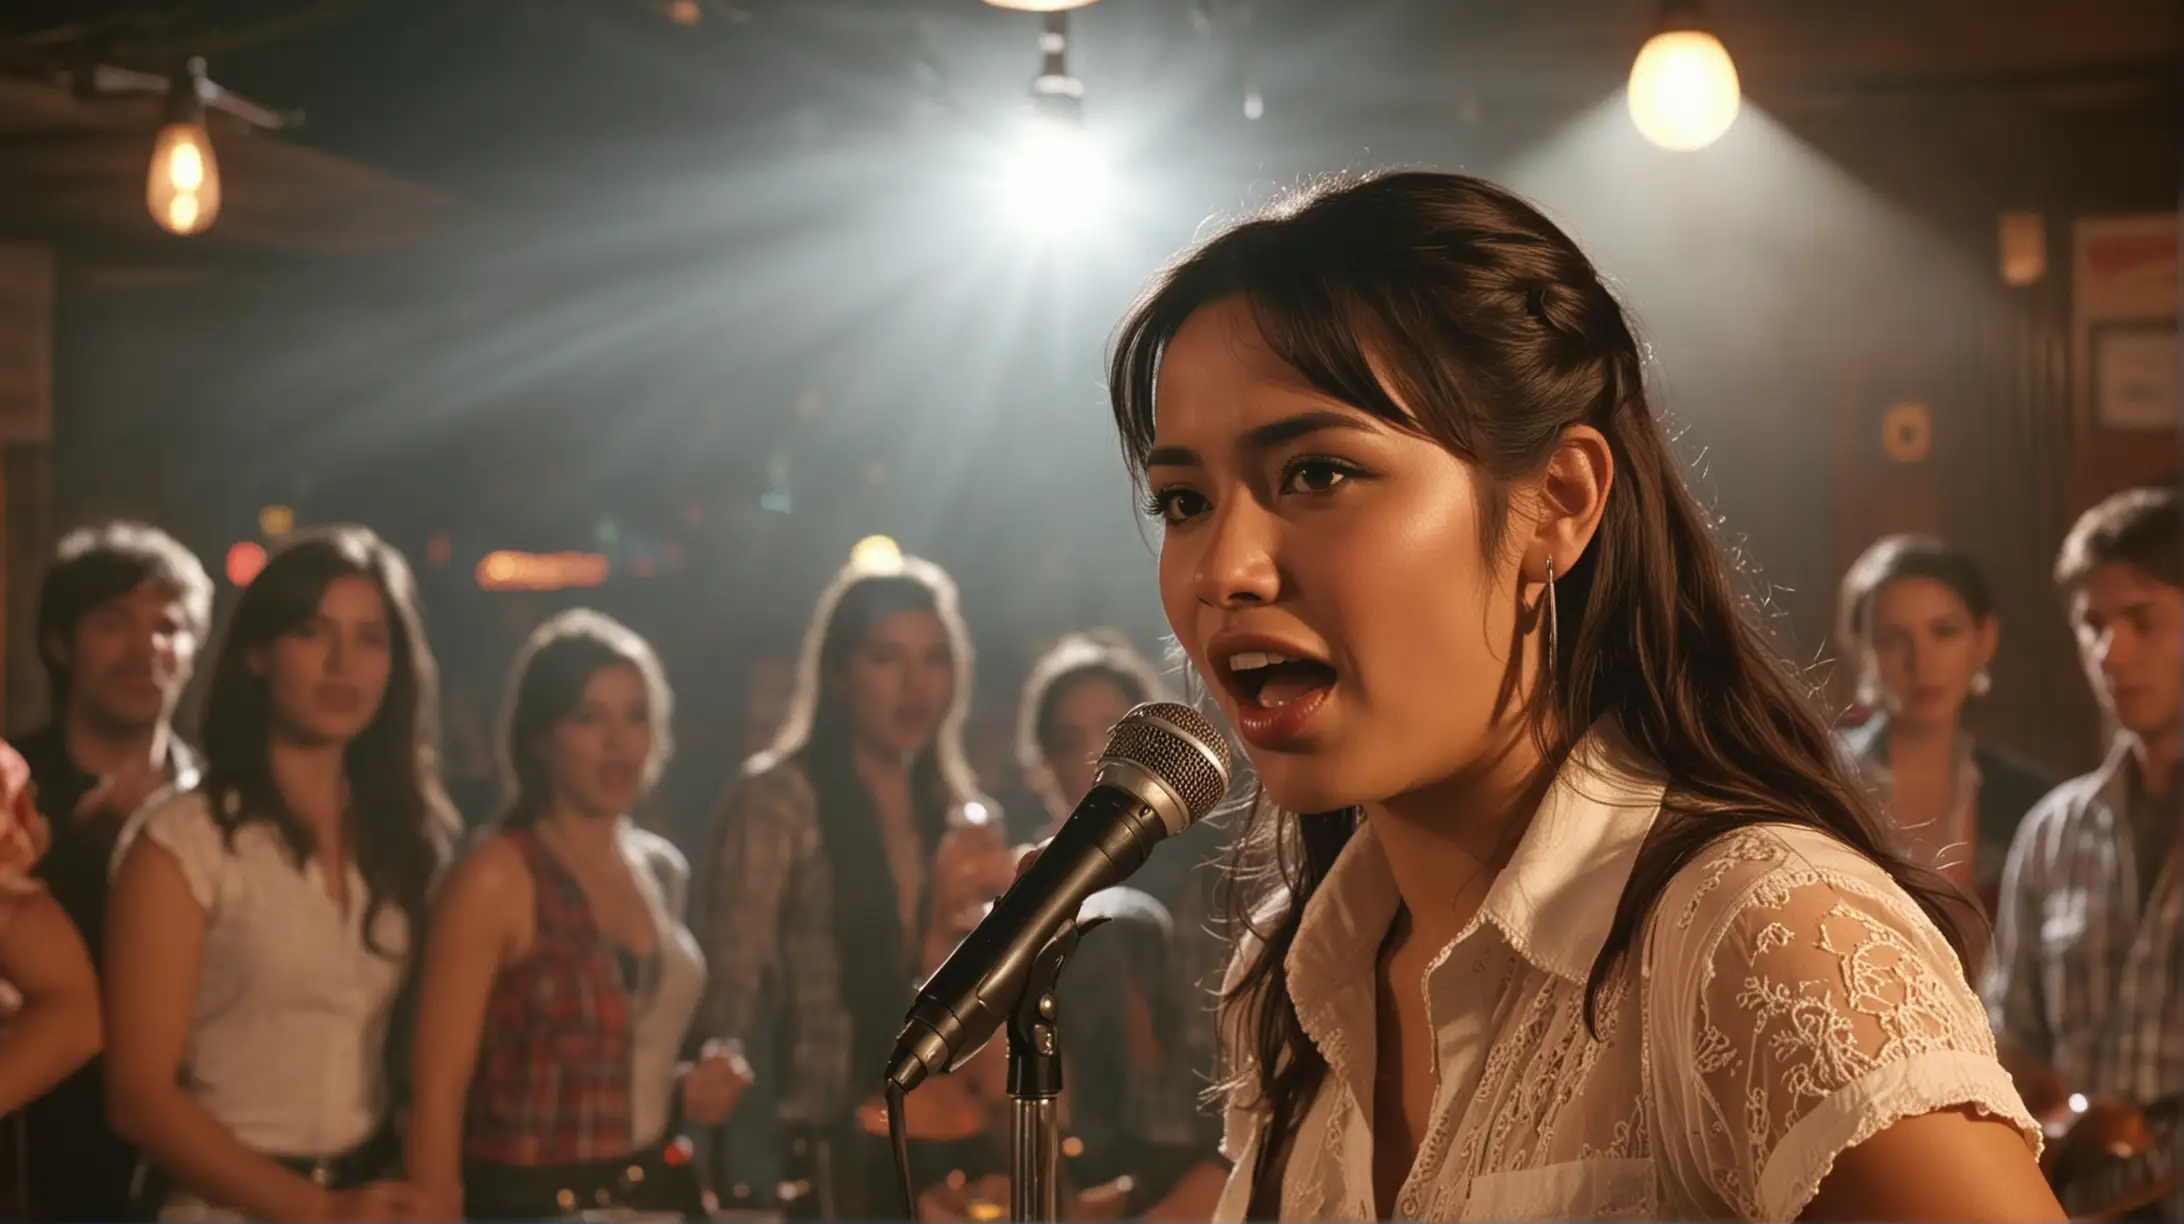 Roadhouse bar, CLOSE UP ONE Mexican girl singing on stage, with spotlight, smokey, mood lighting, bar fight in background, photo realistic, cinematic, 35mm film, 50mm lens